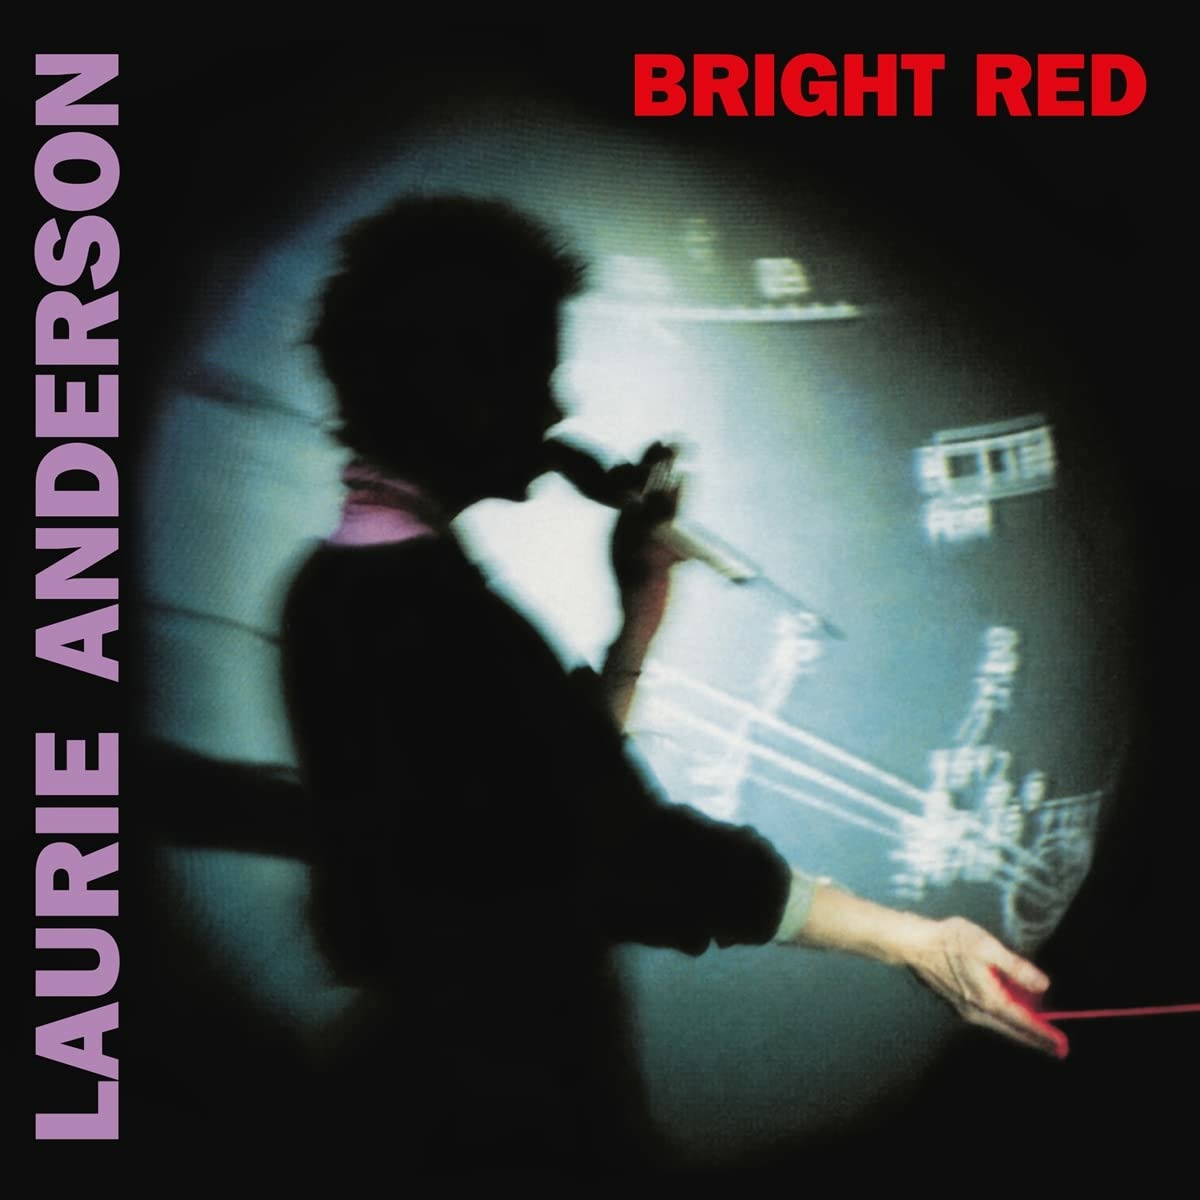 ANDERSON, LAURIE - BRIGHT RED, Vinyl